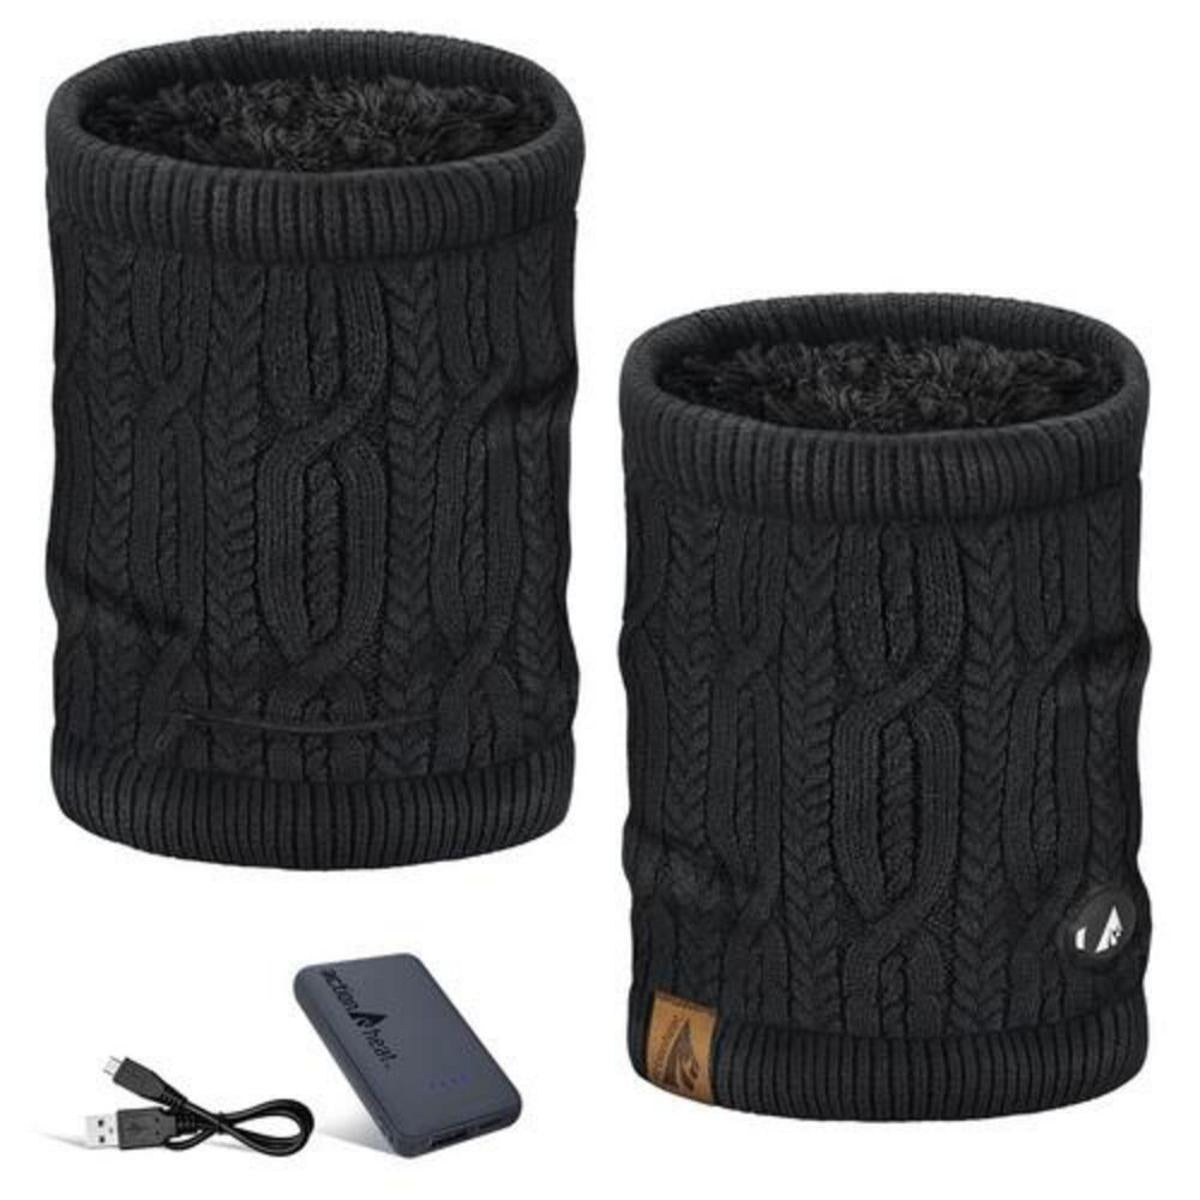 Open Box ActionHeat 5V Battery Heated Cable Knit Neck Gaiter - Back